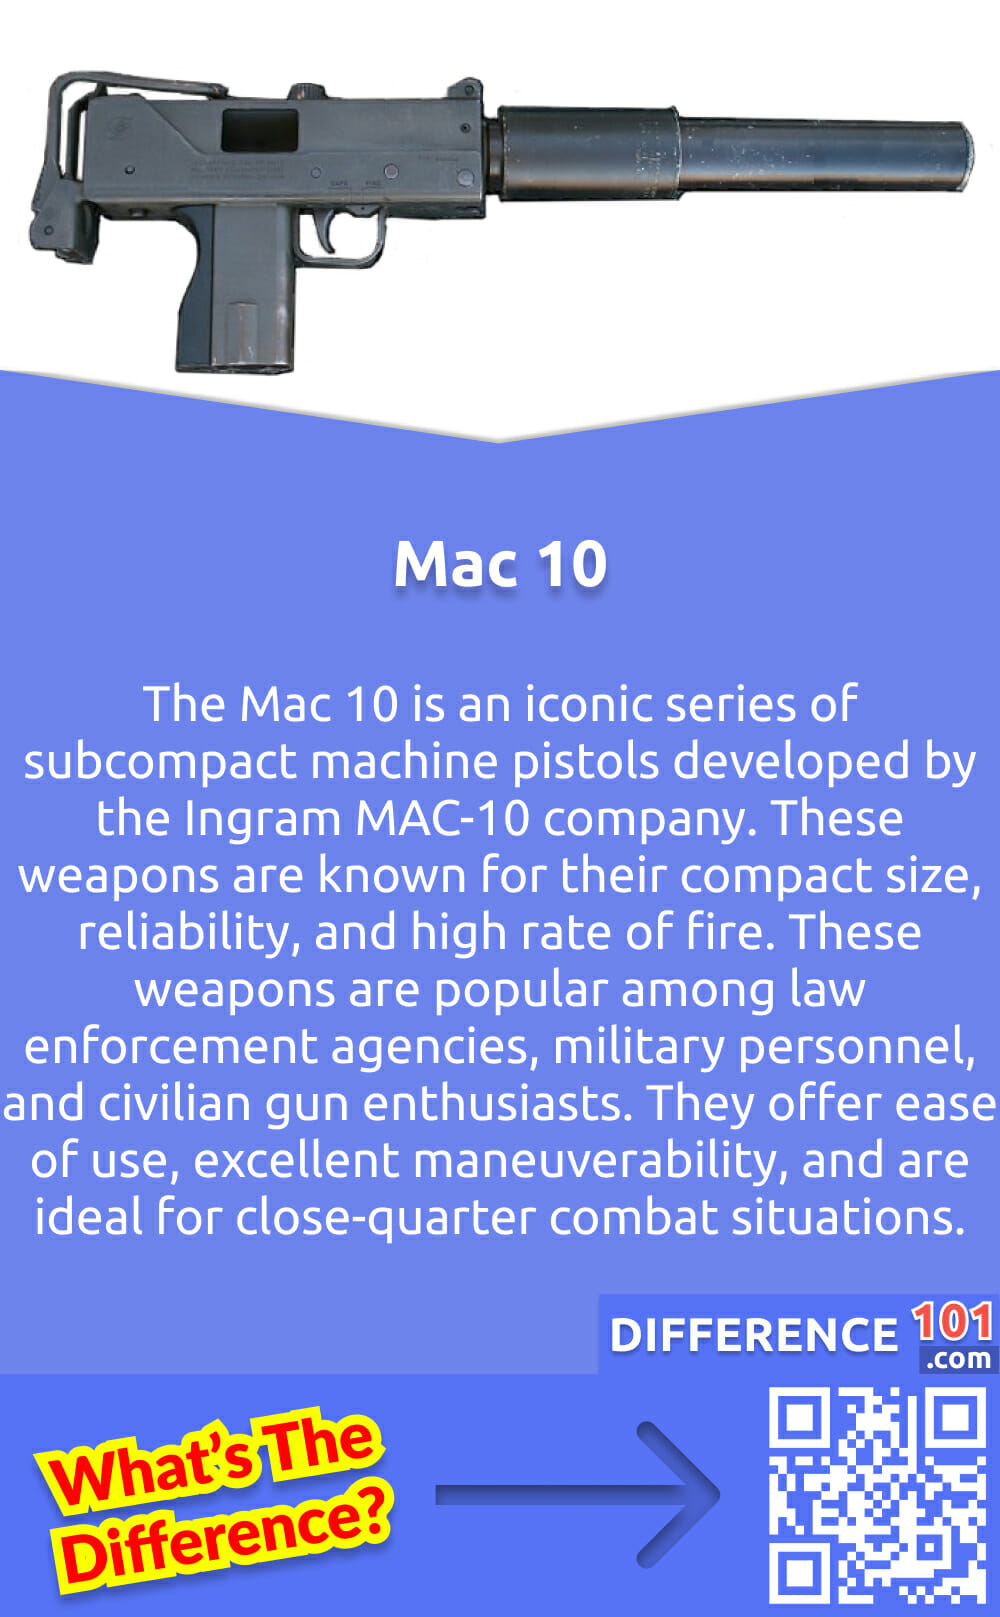 What Is Mac 10? The Mac 10 is an iconic series of subcompact machine pistols developed by the Ingram MAC-10 company. These weapons are known for their compact size, reliability, and high rate of fire. The Mac 10 series comprises a range of firearms that vary in size, barrel length, and calibers. These weapons are popular among law enforcement agencies, military personnel, and civilian gun enthusiasts. They offer ease of use, excellent maneuverability, and are ideal for close-quarter combat situations. Despite their popularity, the Mac 10's compact design brings numerous challenges as it requires frequent maintenance and repair. Overall, the Mac 10 is an innovative and efficient firearm that has established its reputation in the world of subcompact machine pistols.